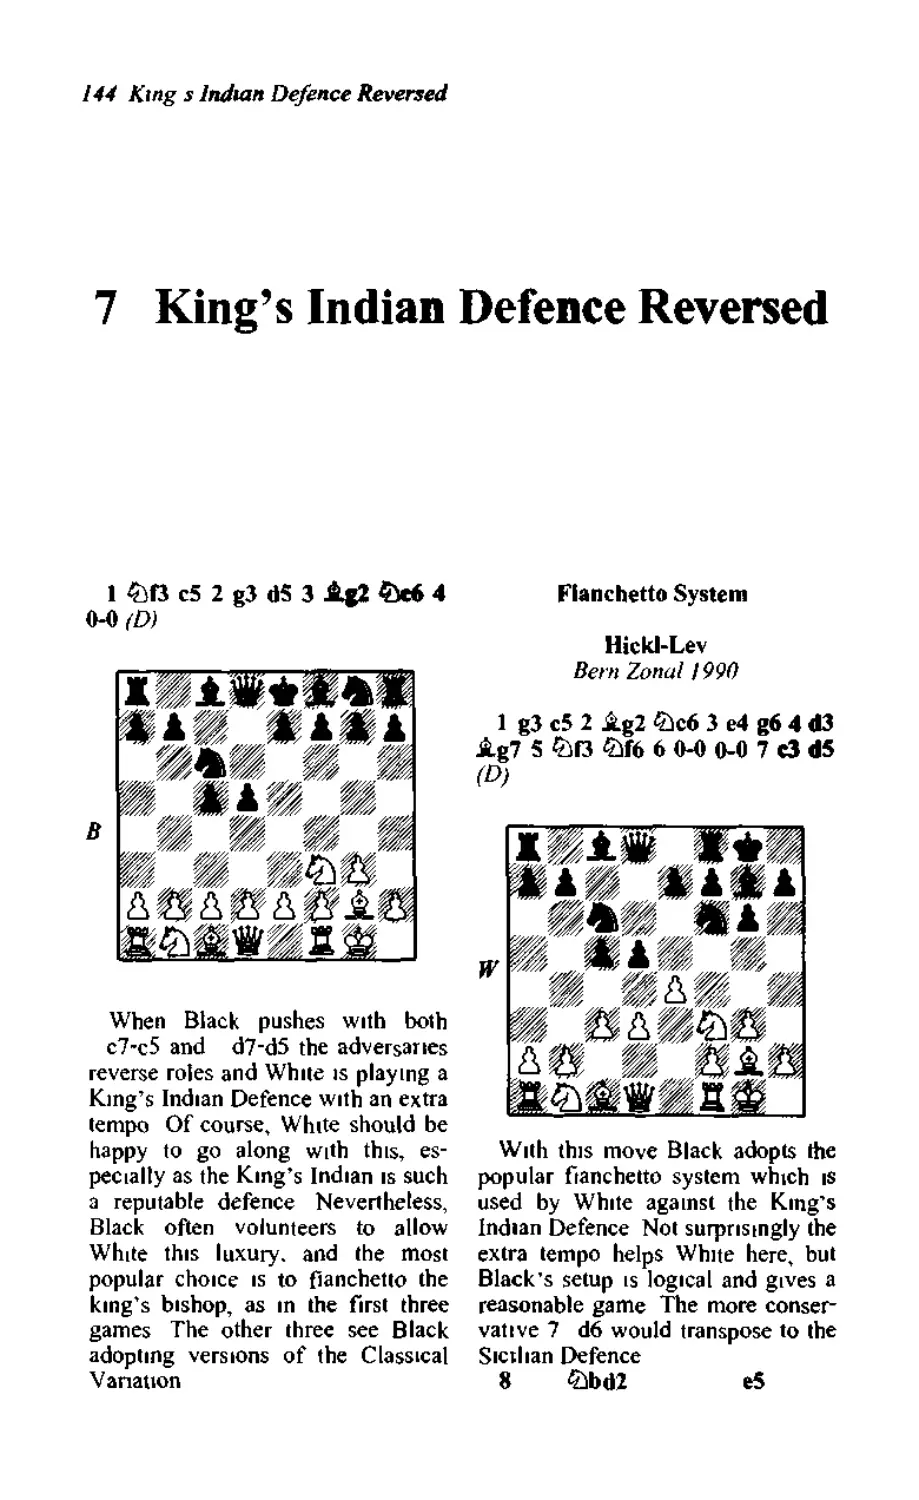 7. King's indian defence reversed